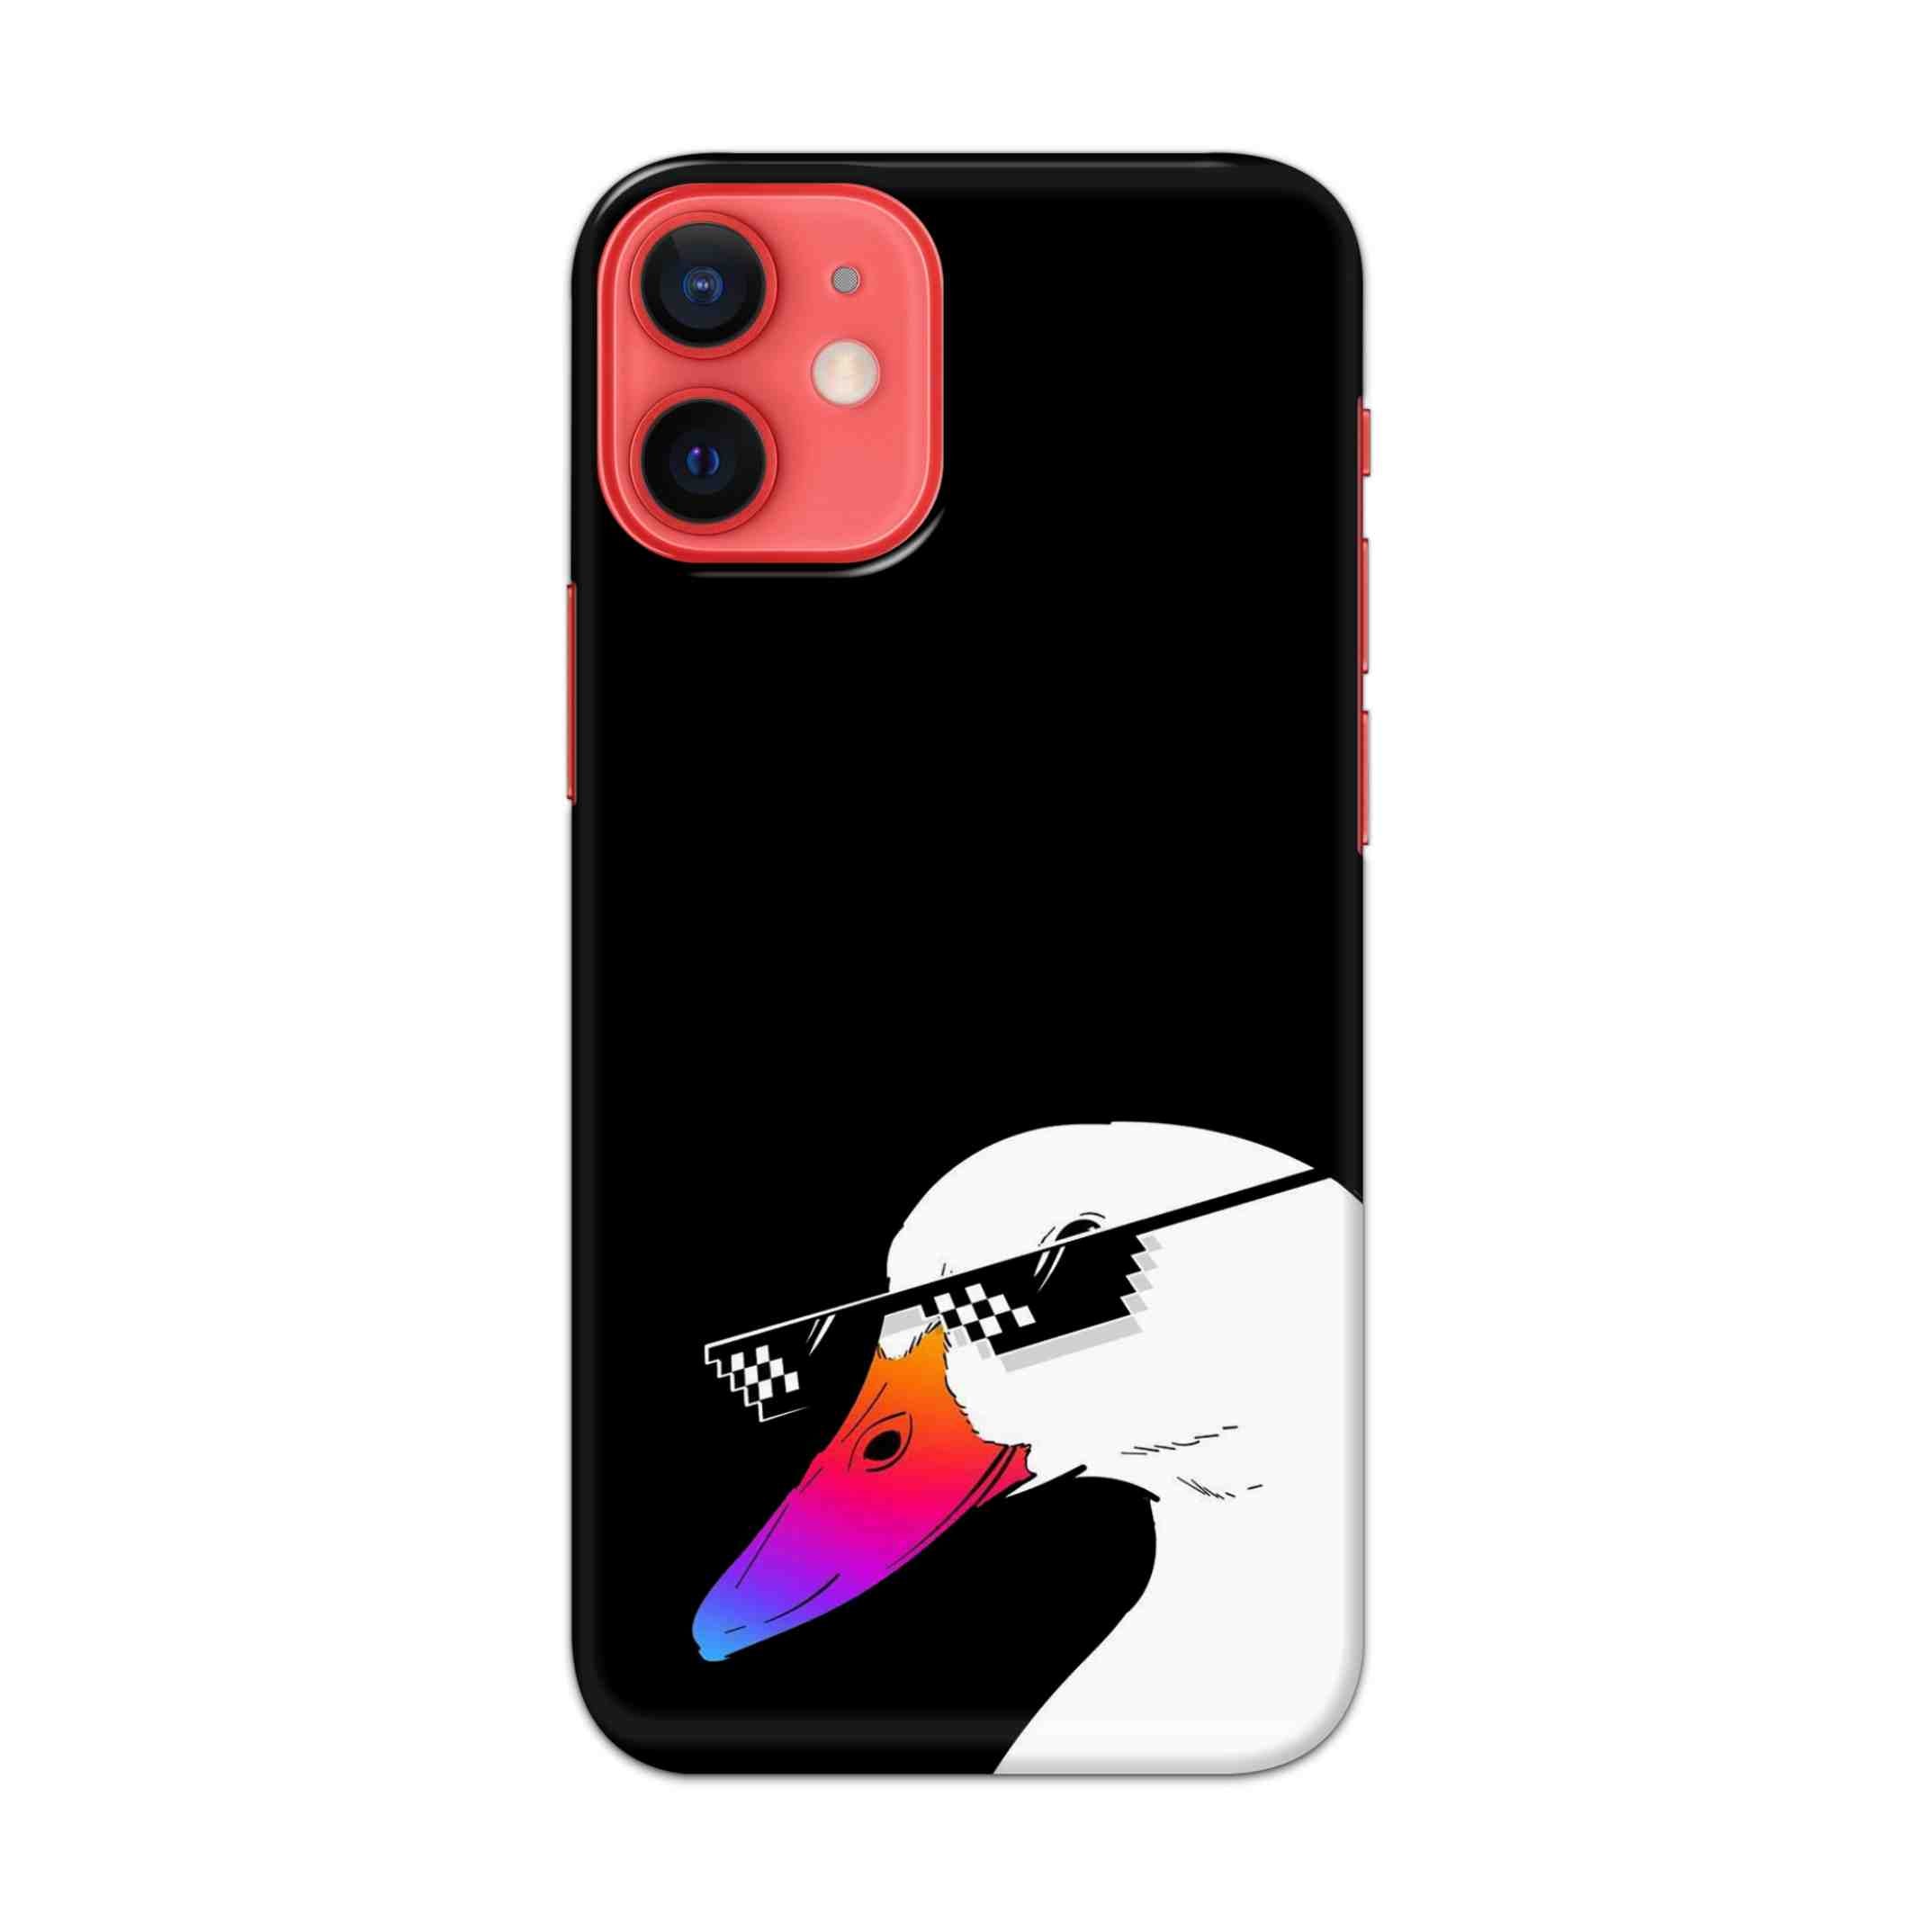 Buy Neon Duck Hard Back Mobile Phone Case/Cover For Apple iPhone 12 mini Online